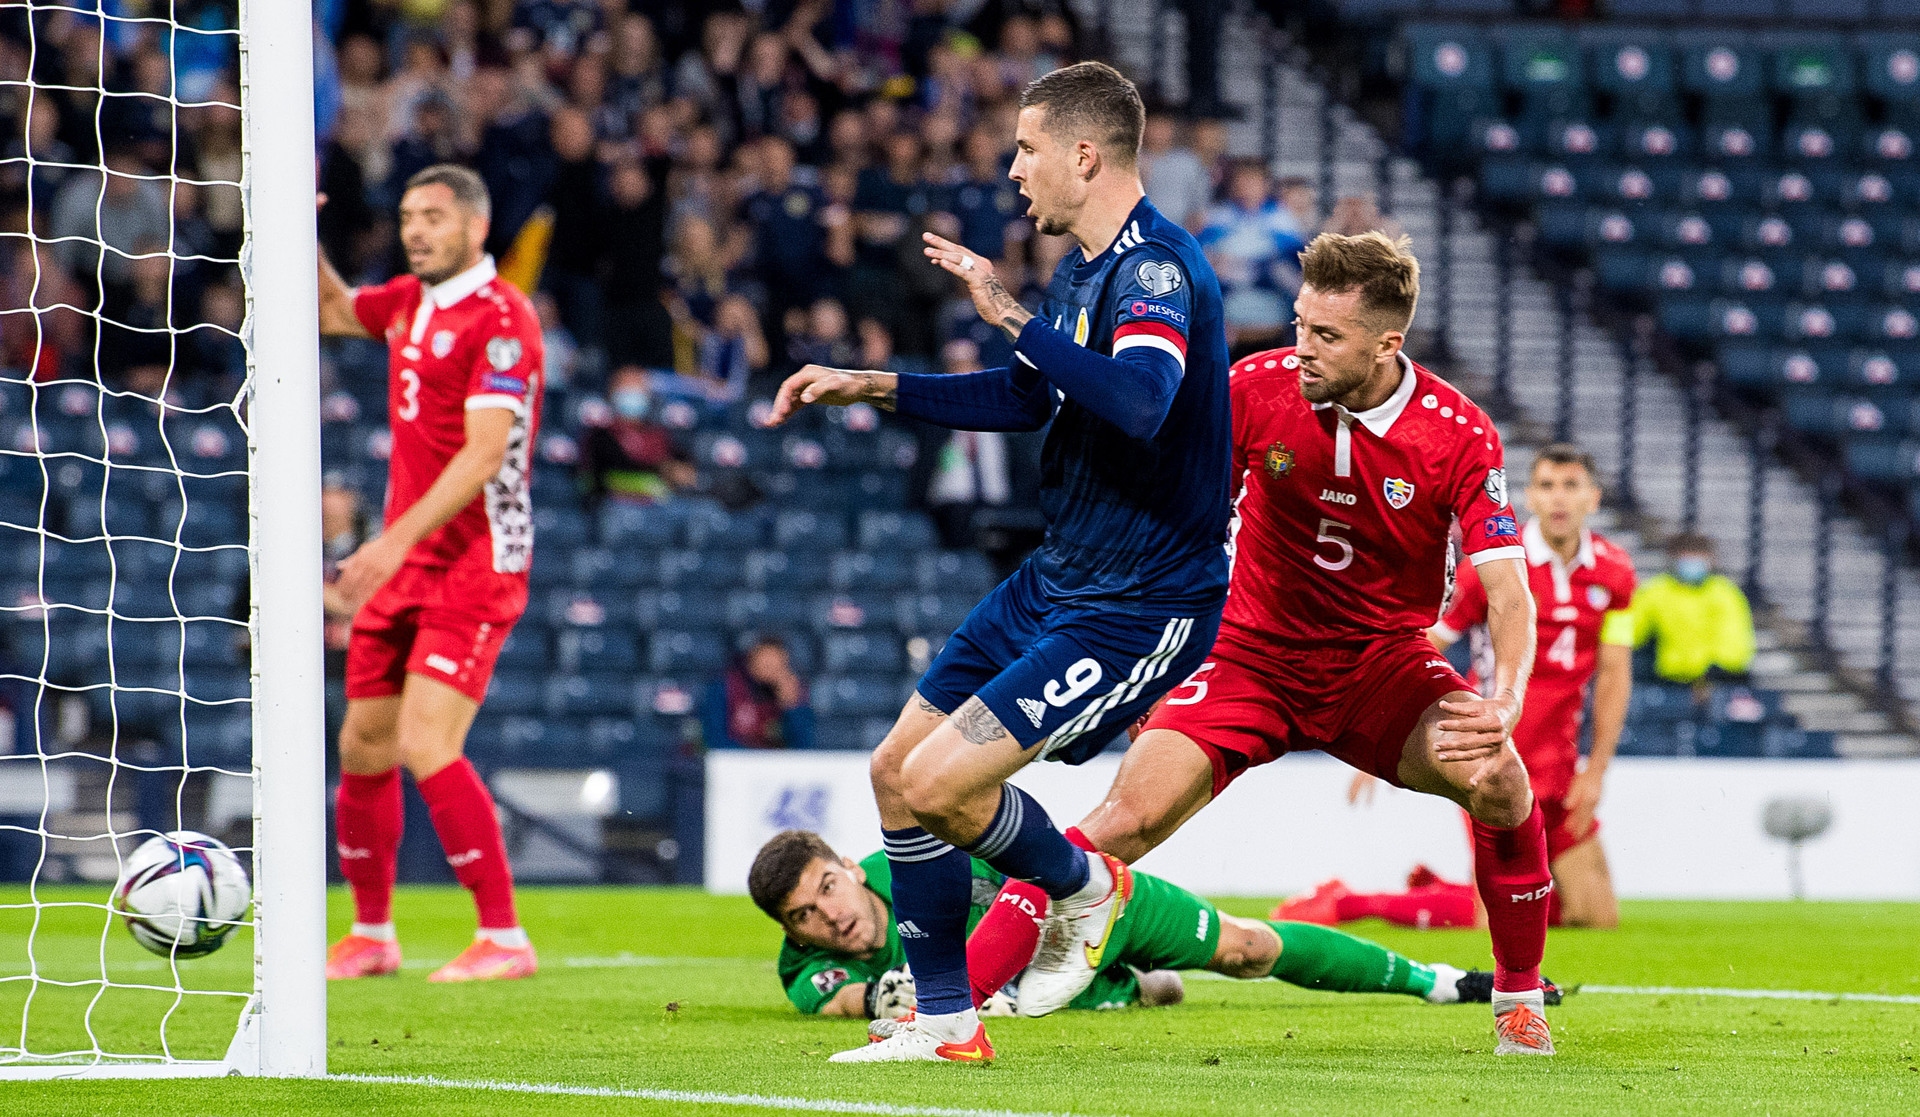 <strong>Nerves were seemingly settled at Hampden when Lyndon Dykes prodded home an early goal – but it became a long night for the Tartan Army as Scotland failed to put the Moldovans to the sword despite a string of good chances.</strong>”/><span
class=